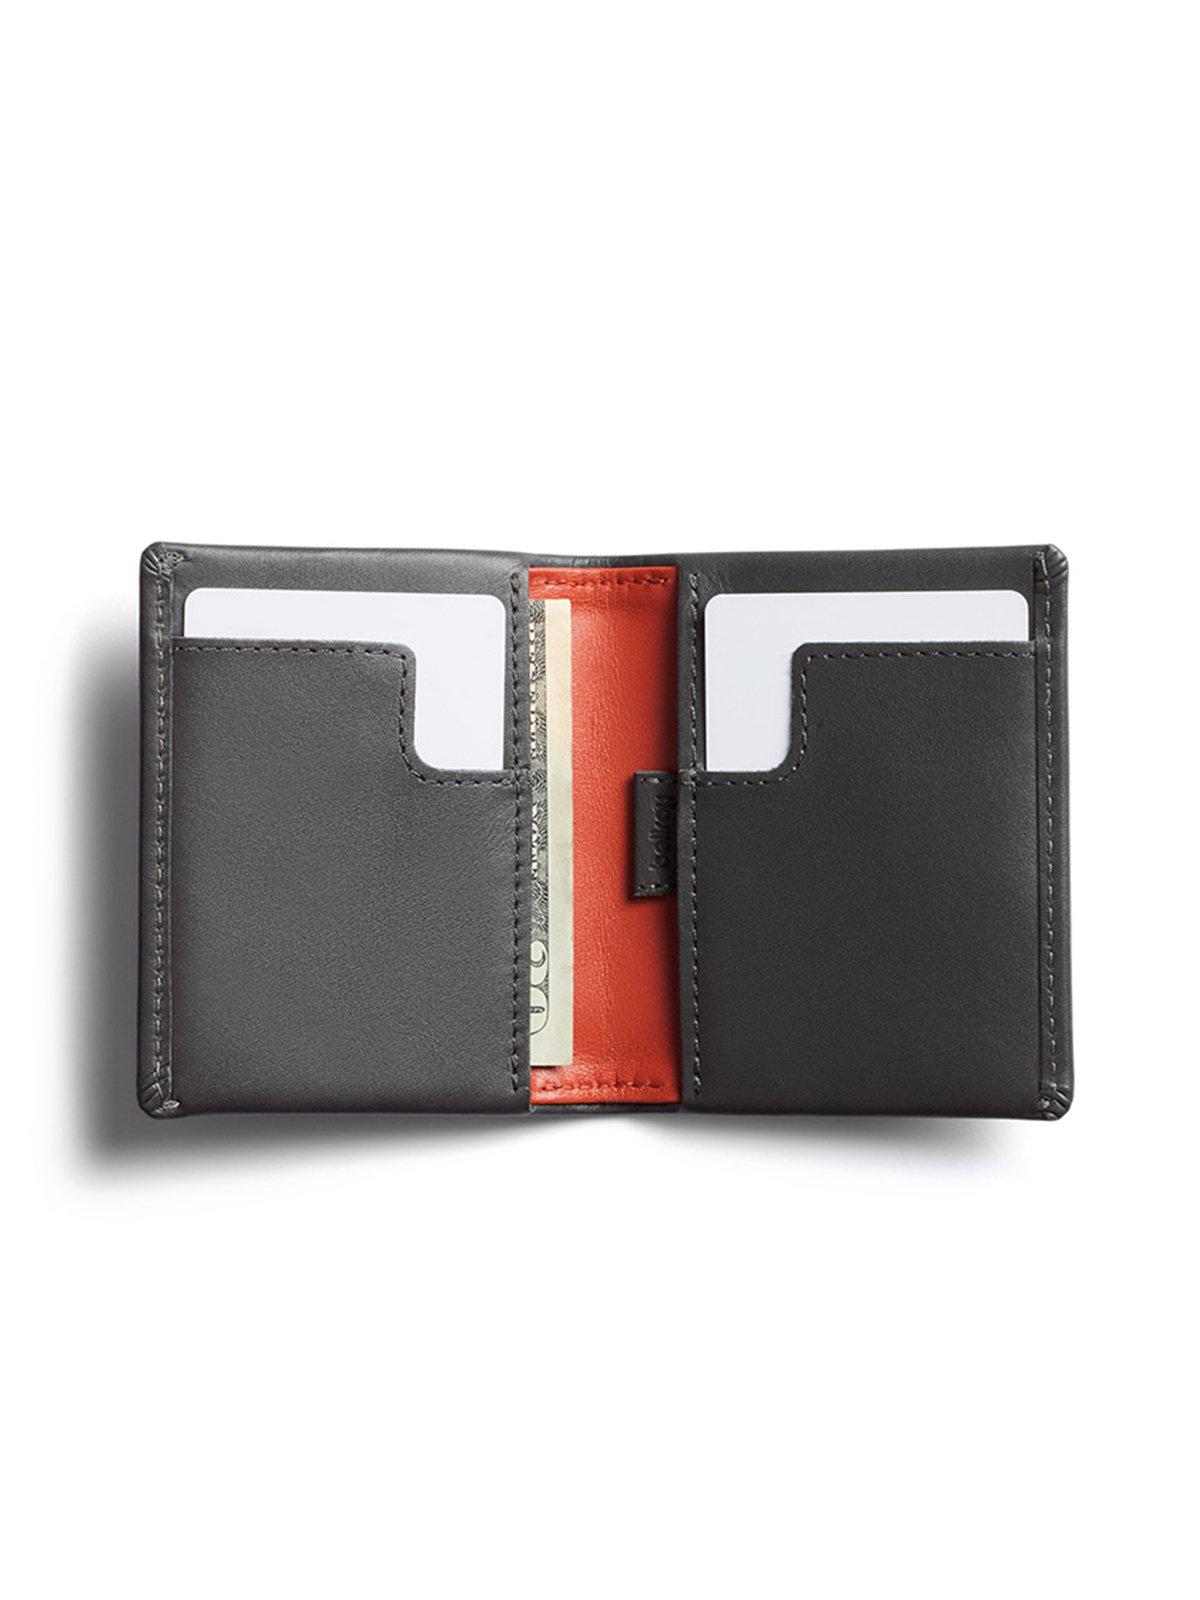 Bellroy Slim Sleeve Wallet Charcoal - MORE by Morello Indonesia